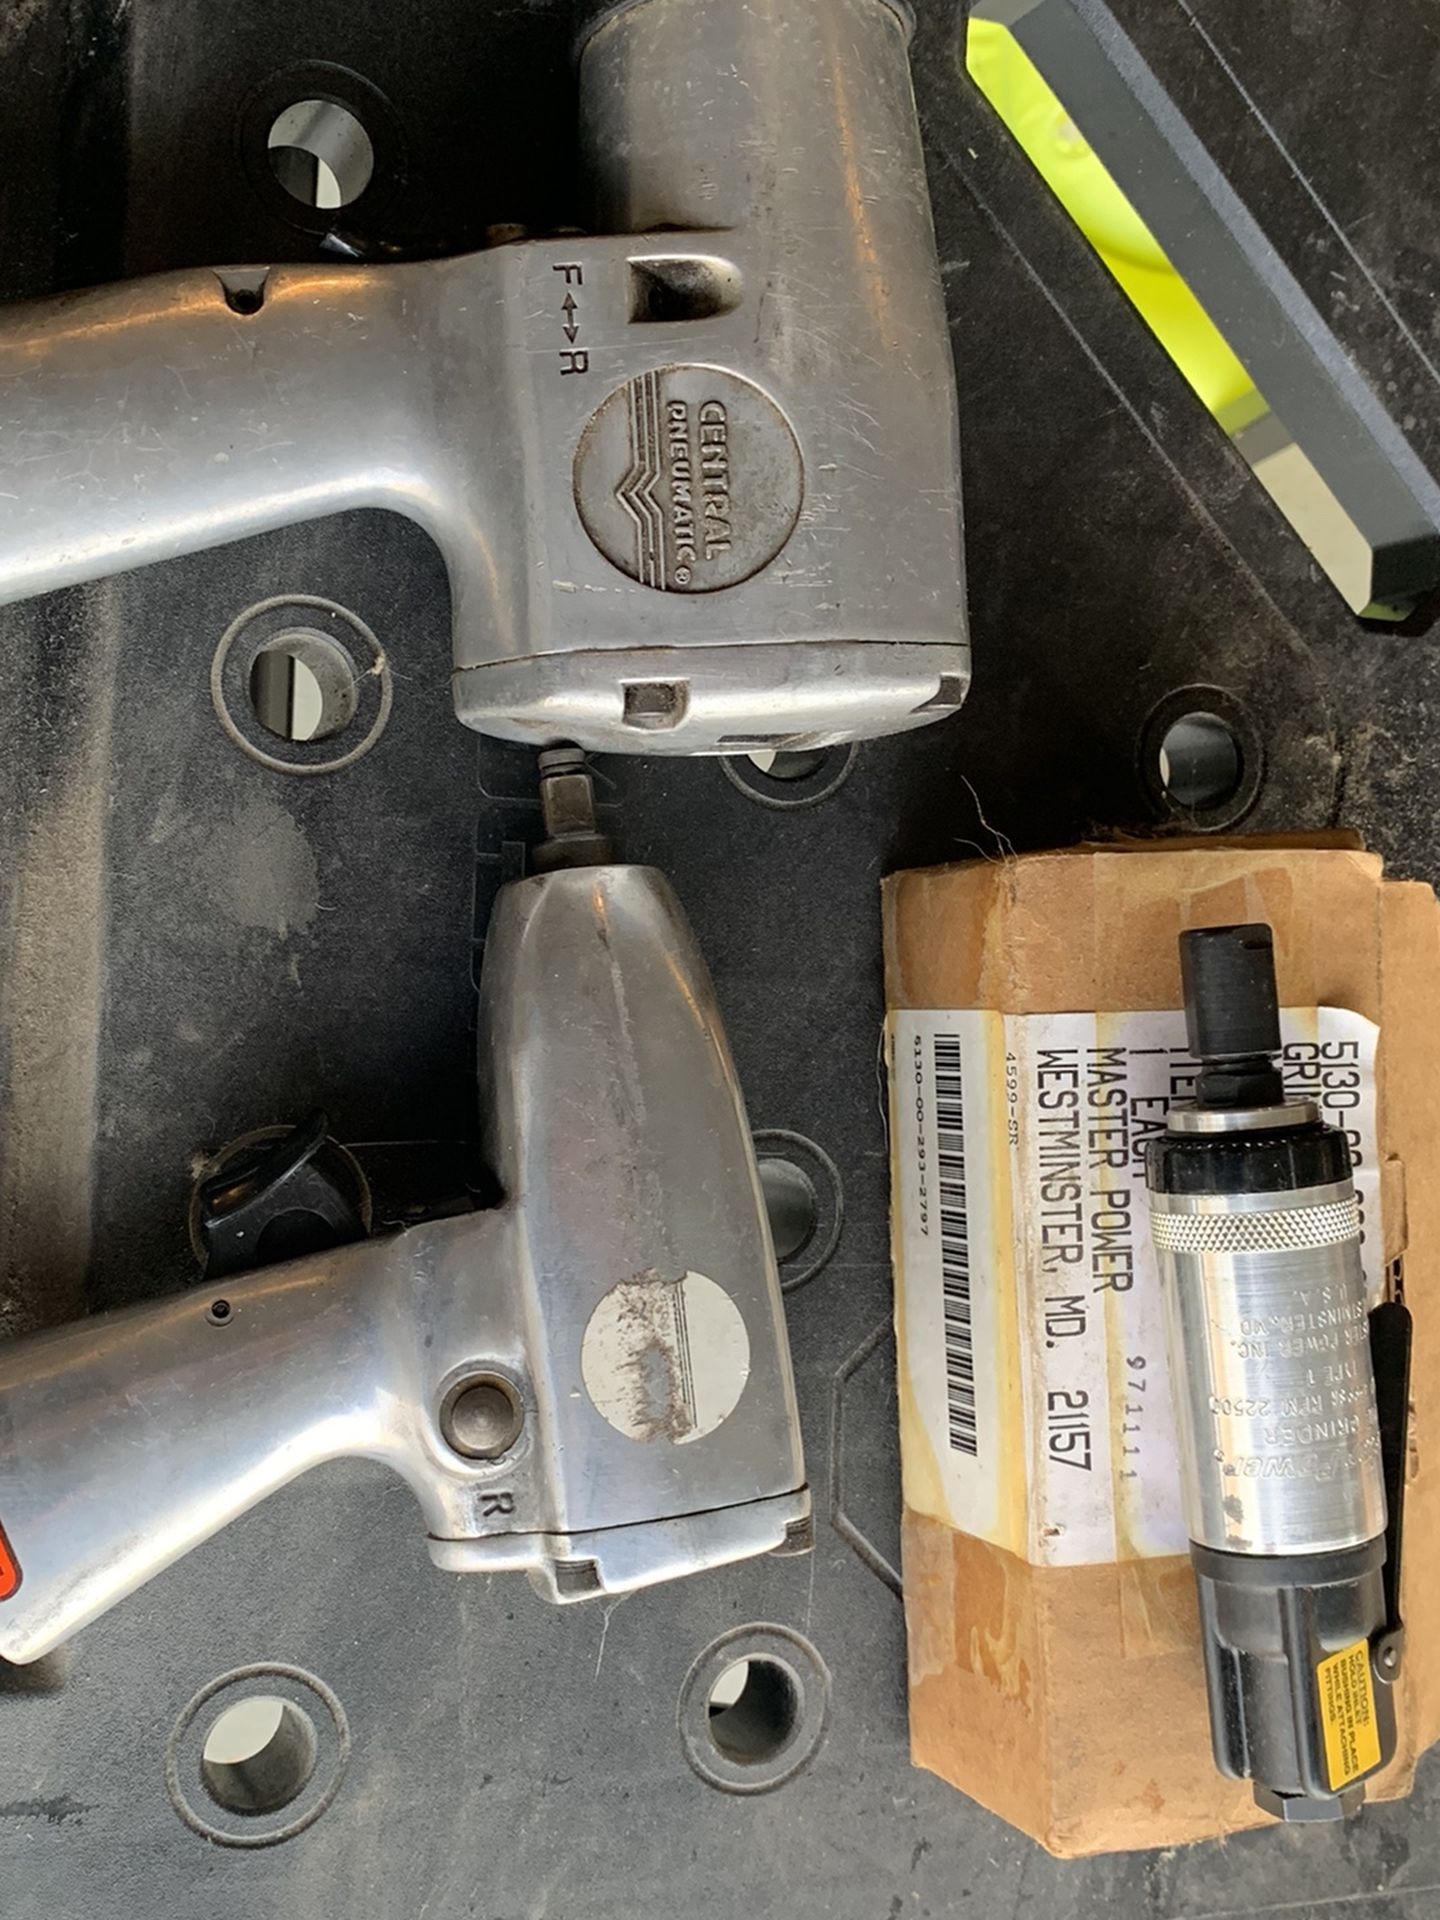 Pneumatic Impact Wrench and NEW die grinder